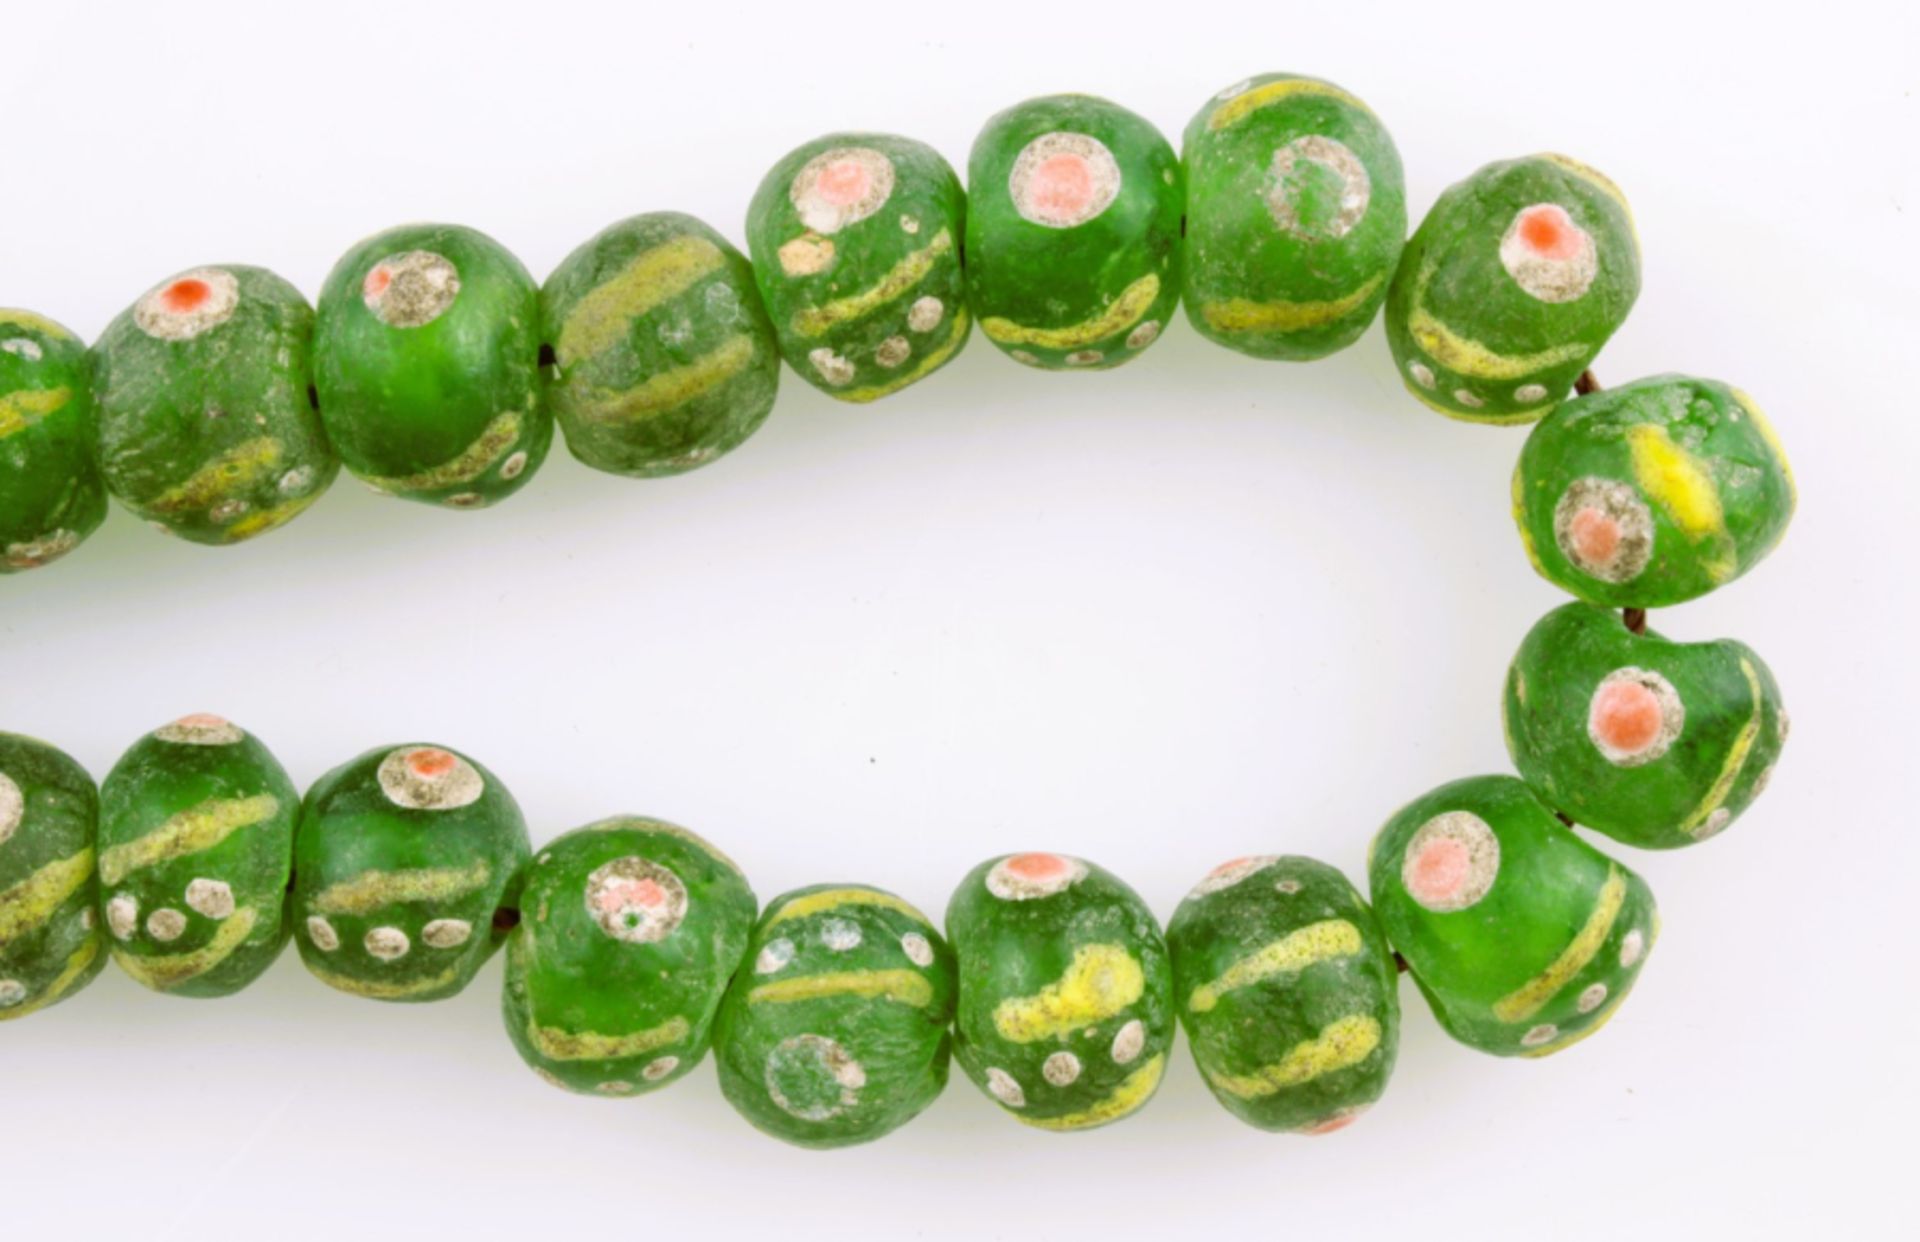 Necklace of green beads of Venetian glass - Image 2 of 2